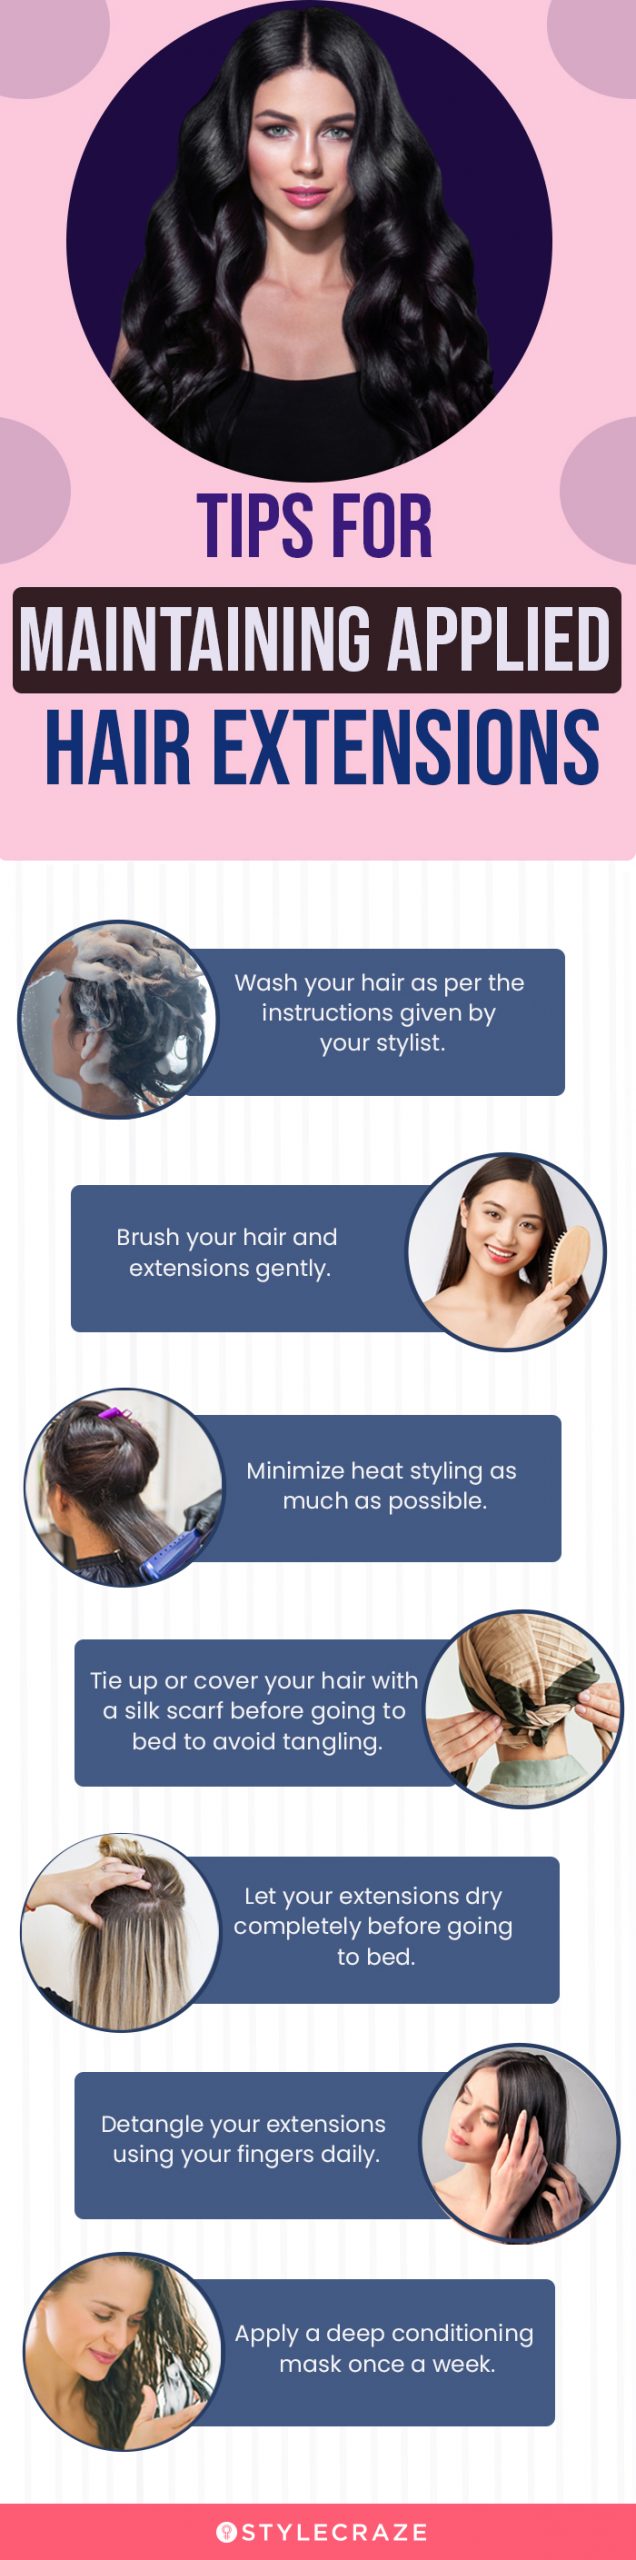 tips to maintaining extension hair [infographic]